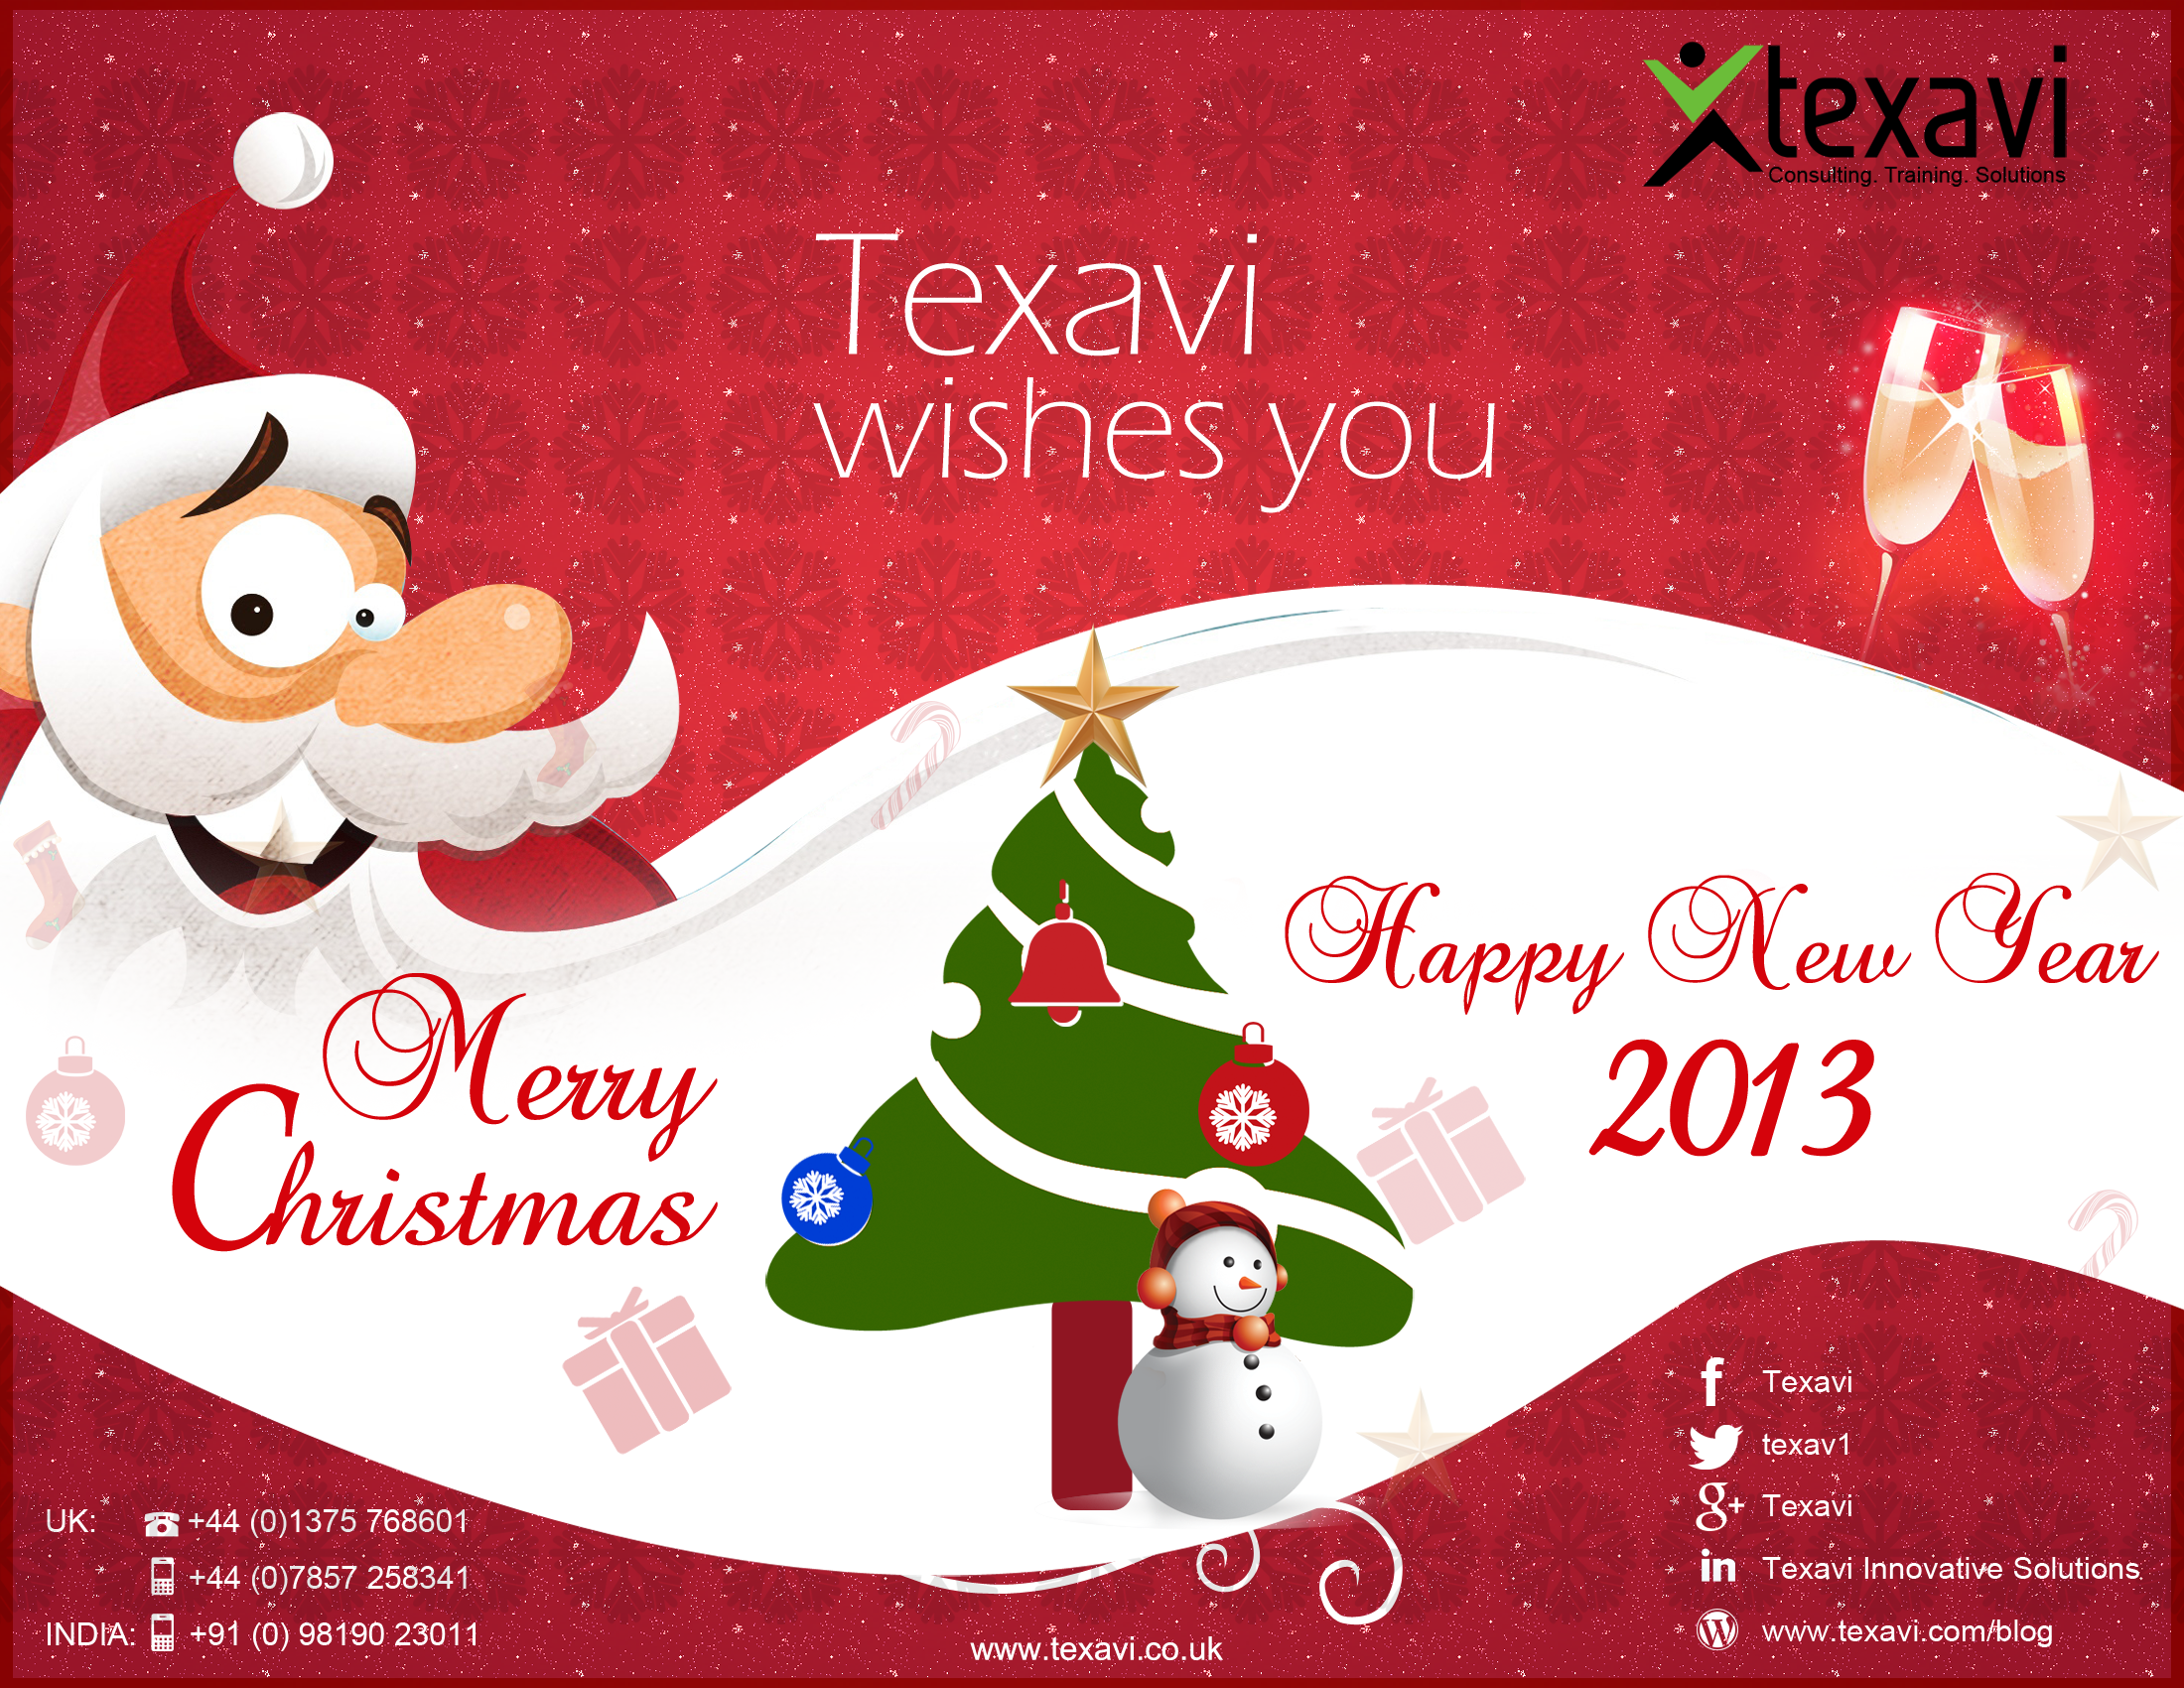 Texavi wishes you a Happy New Year 2013